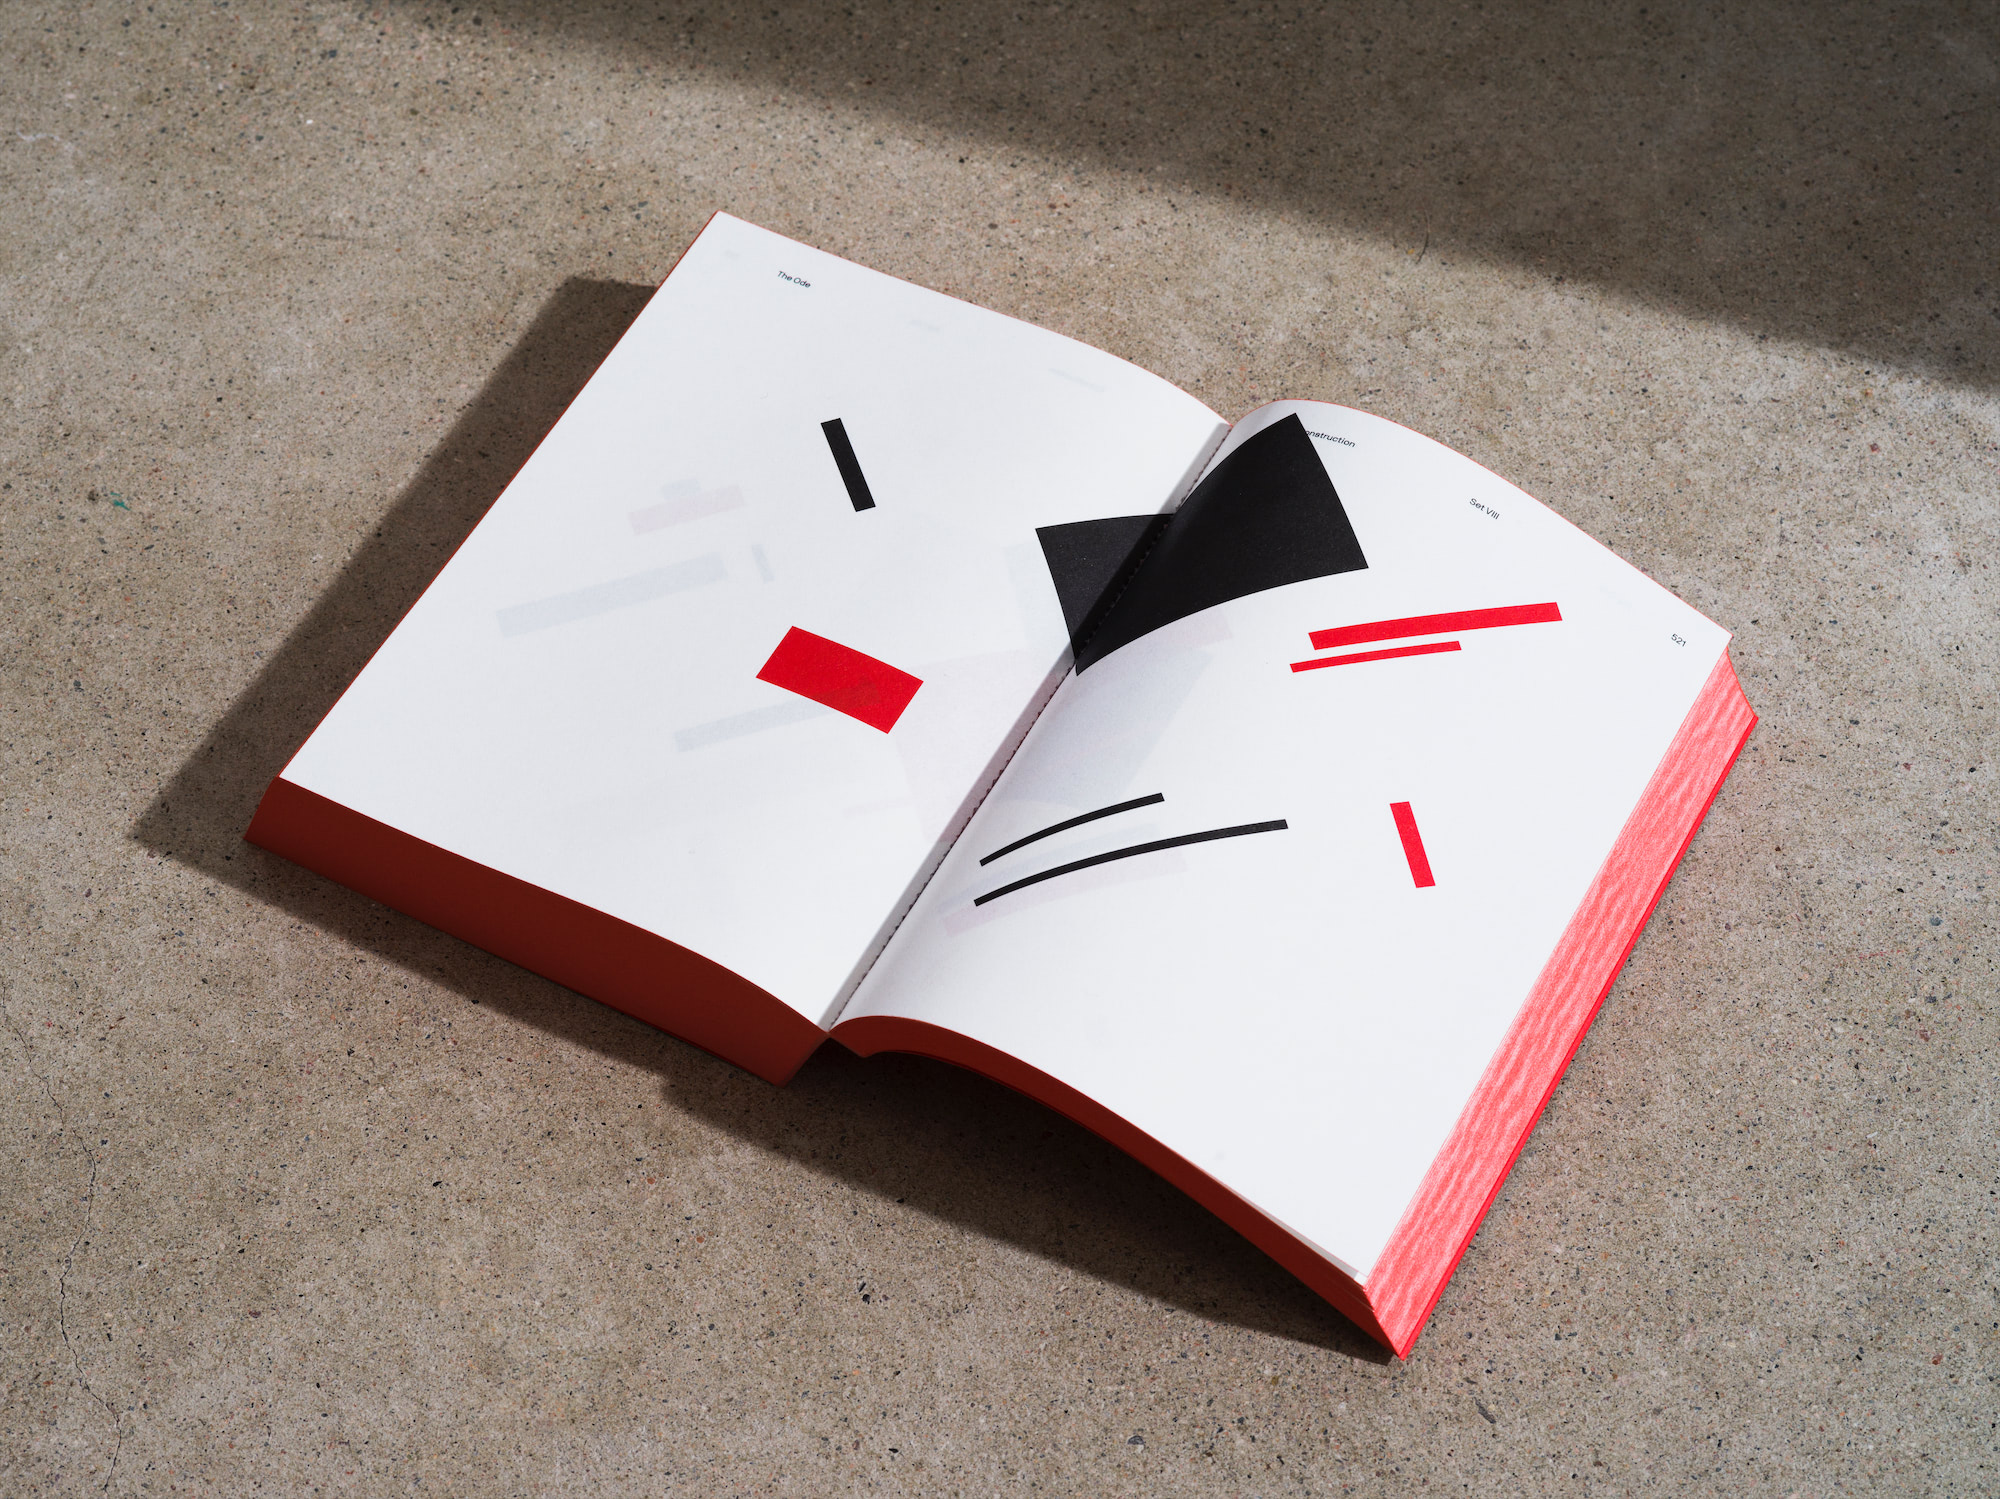 The printed book Ode to Construction – Abstraction in the Digital Age